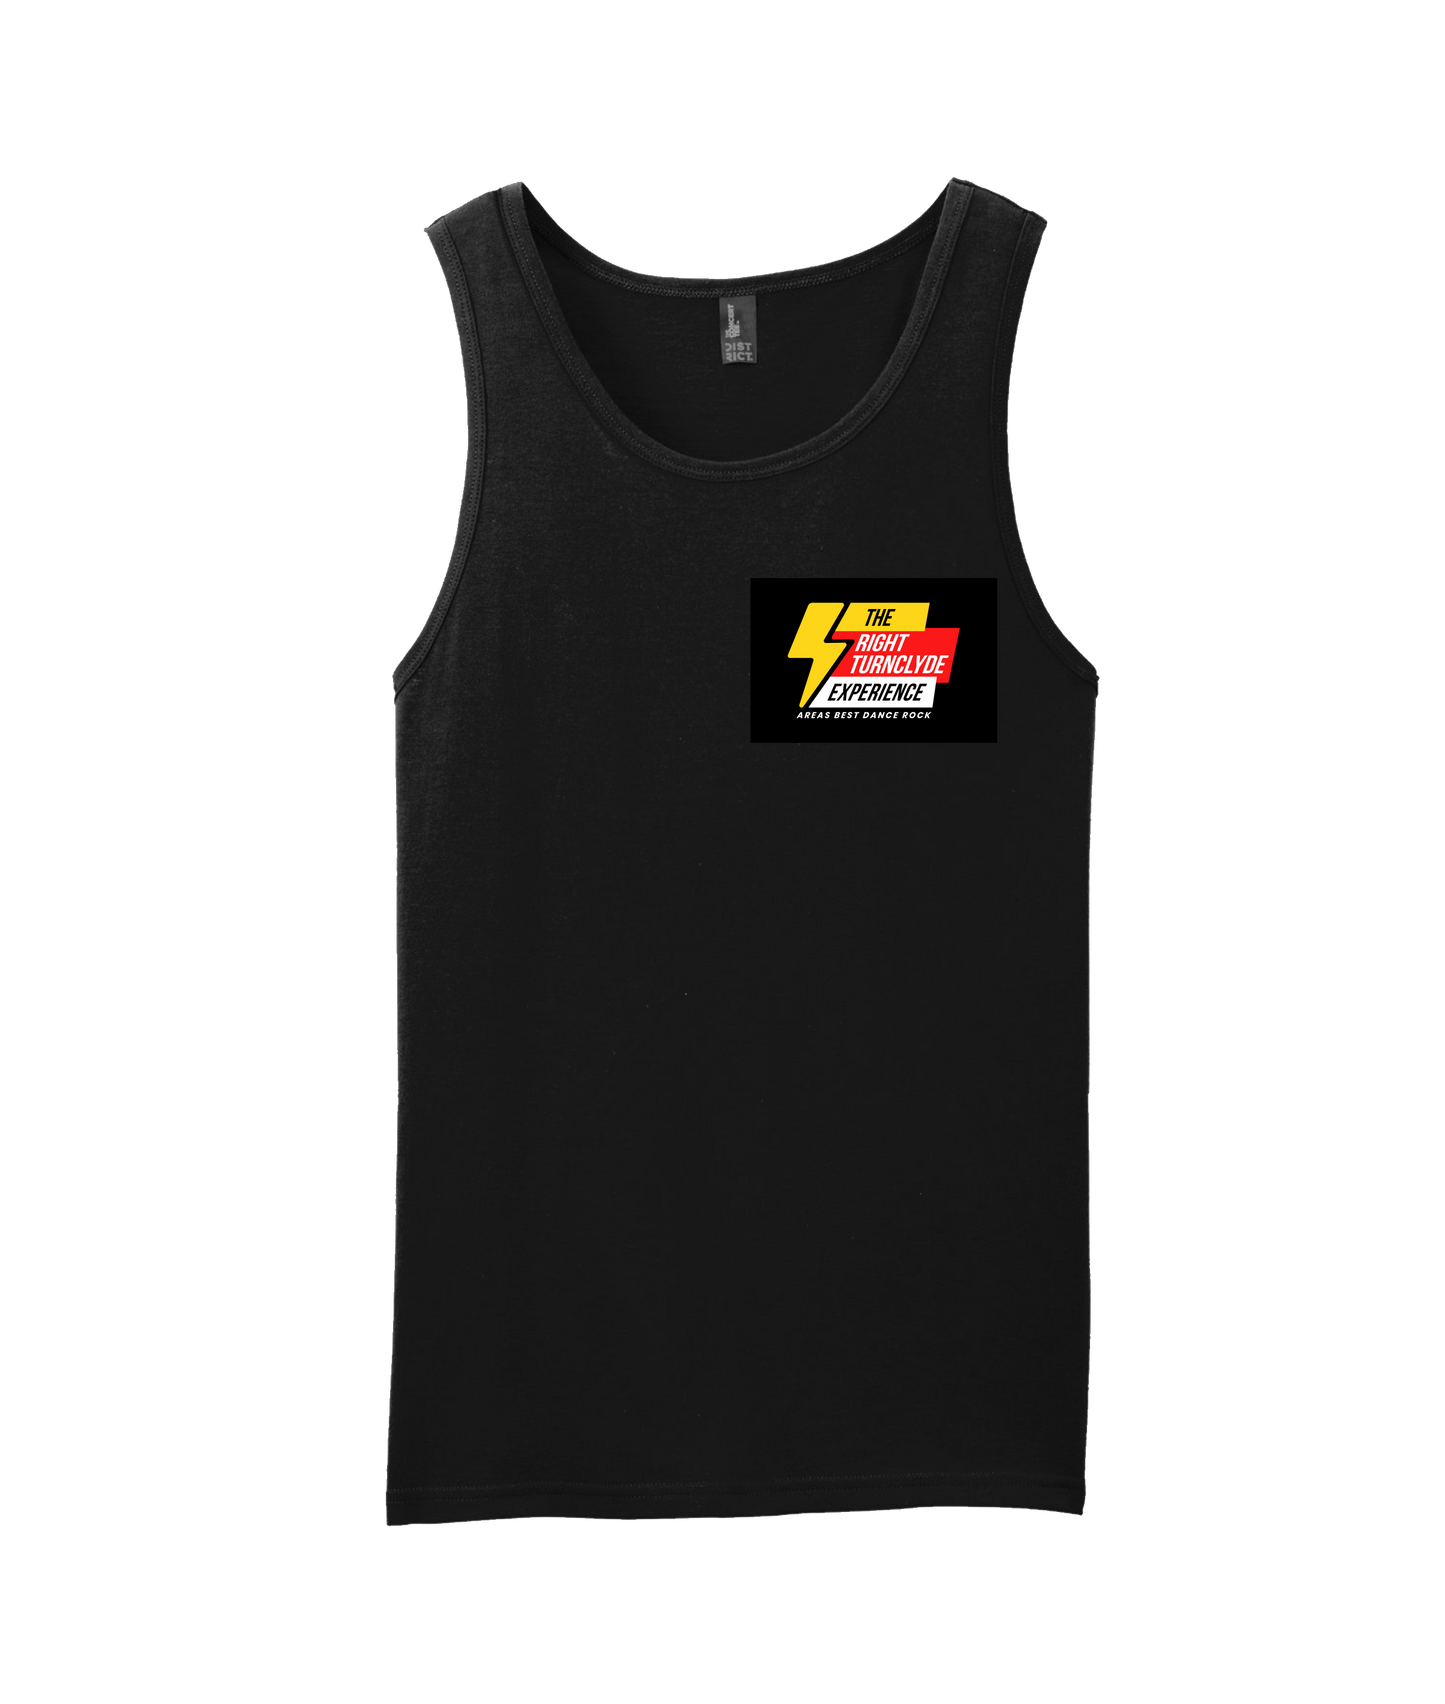 Right TurnClyde "Brucie Gear" Merchandise - The Experience - Black Tank Top